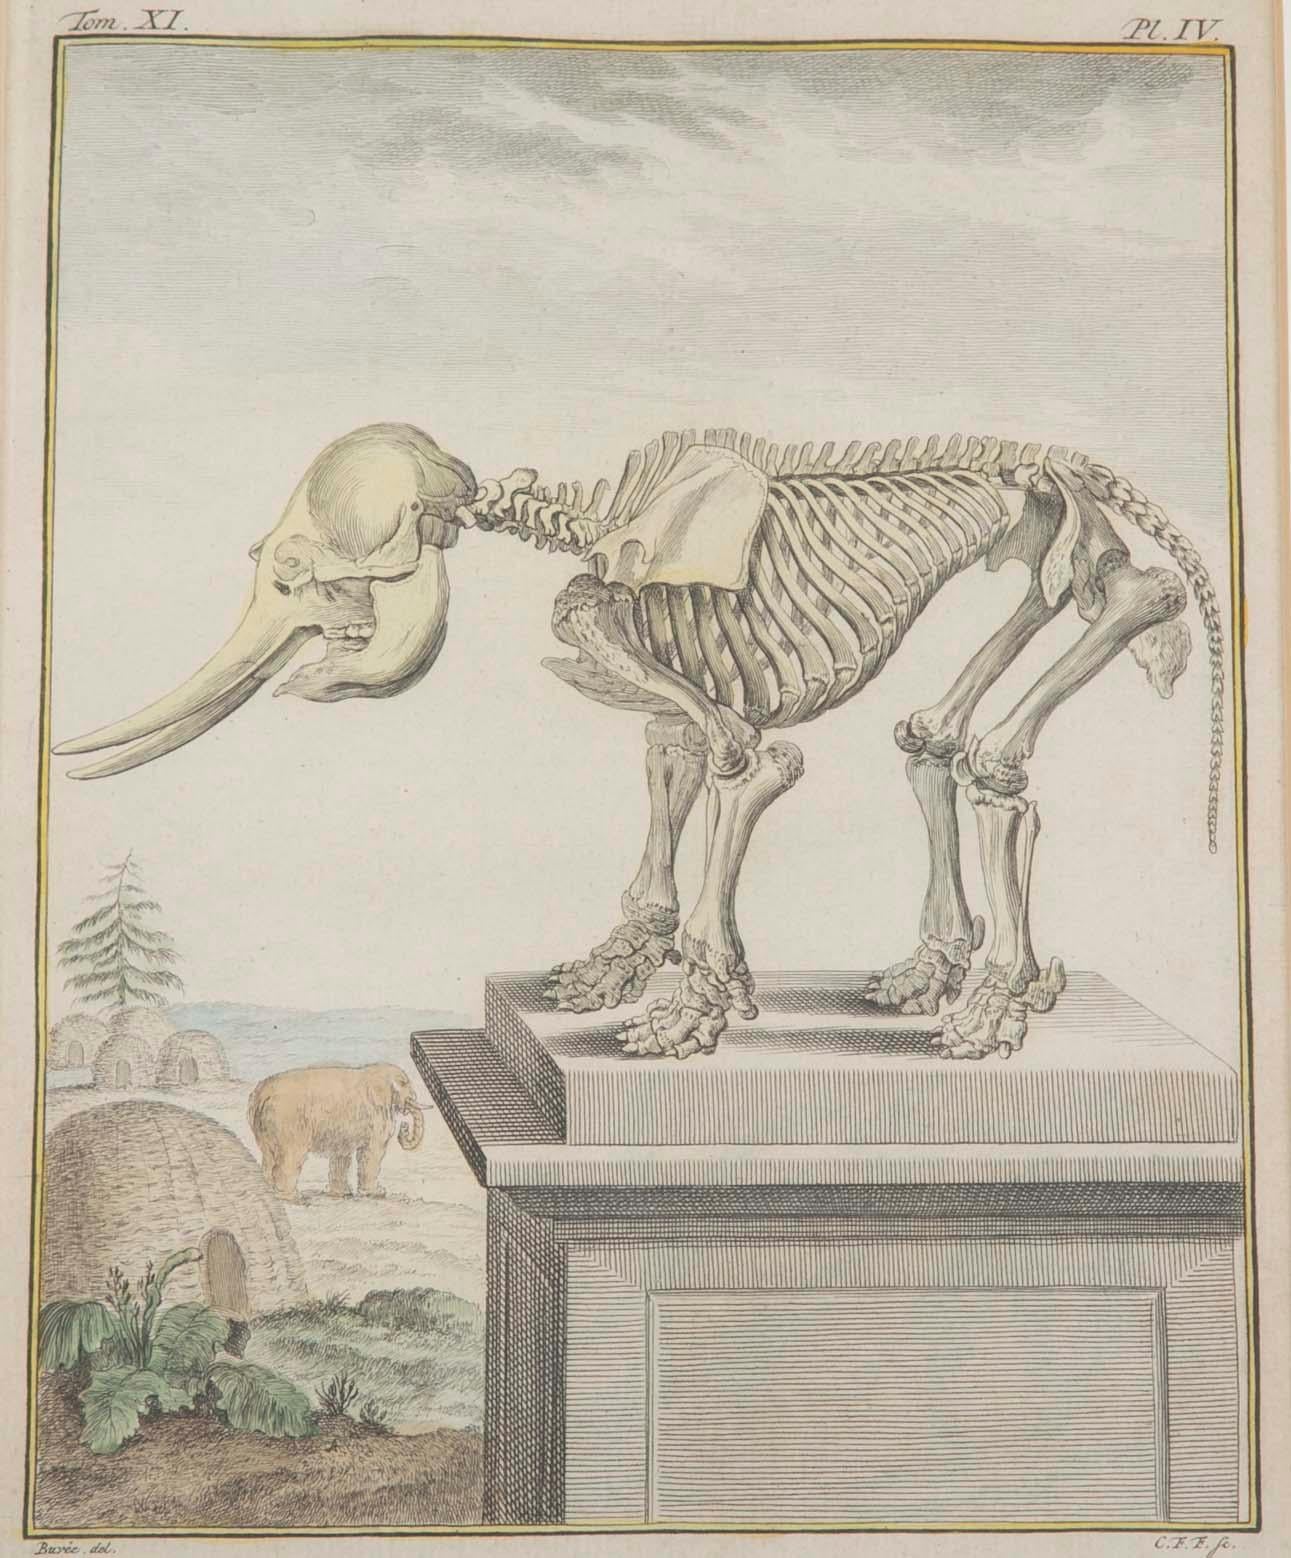 A beautifully rendered etching with hand coloring depicting the skeleton of an elephant on a pedestal. A live elephant, foliage and huts in the background. French, 18th century by Georges Le Clerc, Comte de Buffon, 1707-1788.
From 